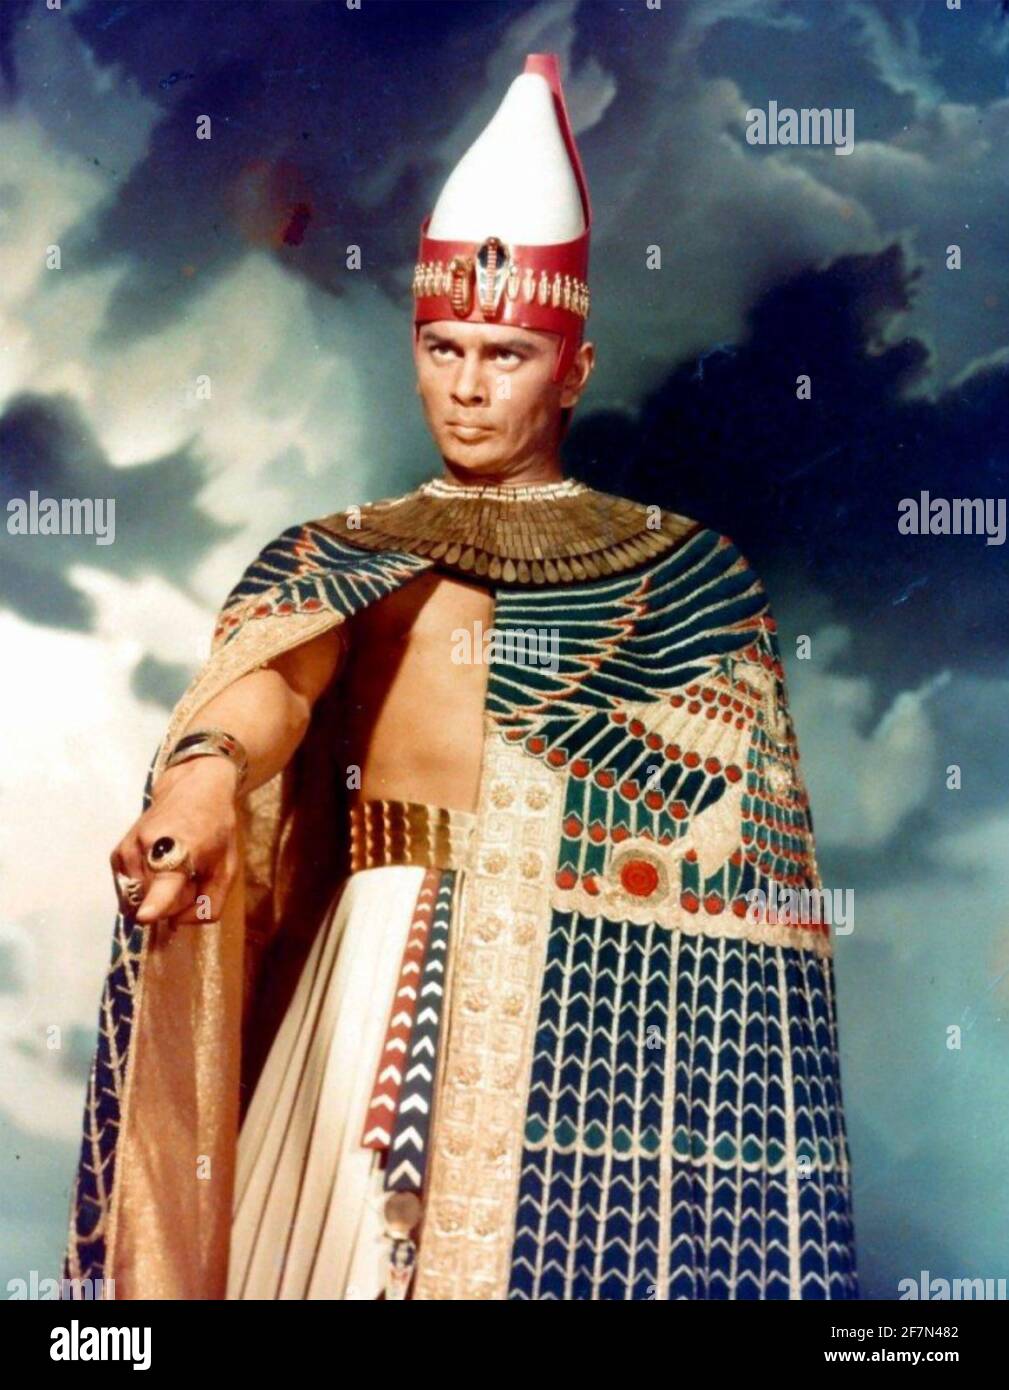 THE TEN COMMANDMENTS film with Yul Brynner as Rameses II Stock Photo